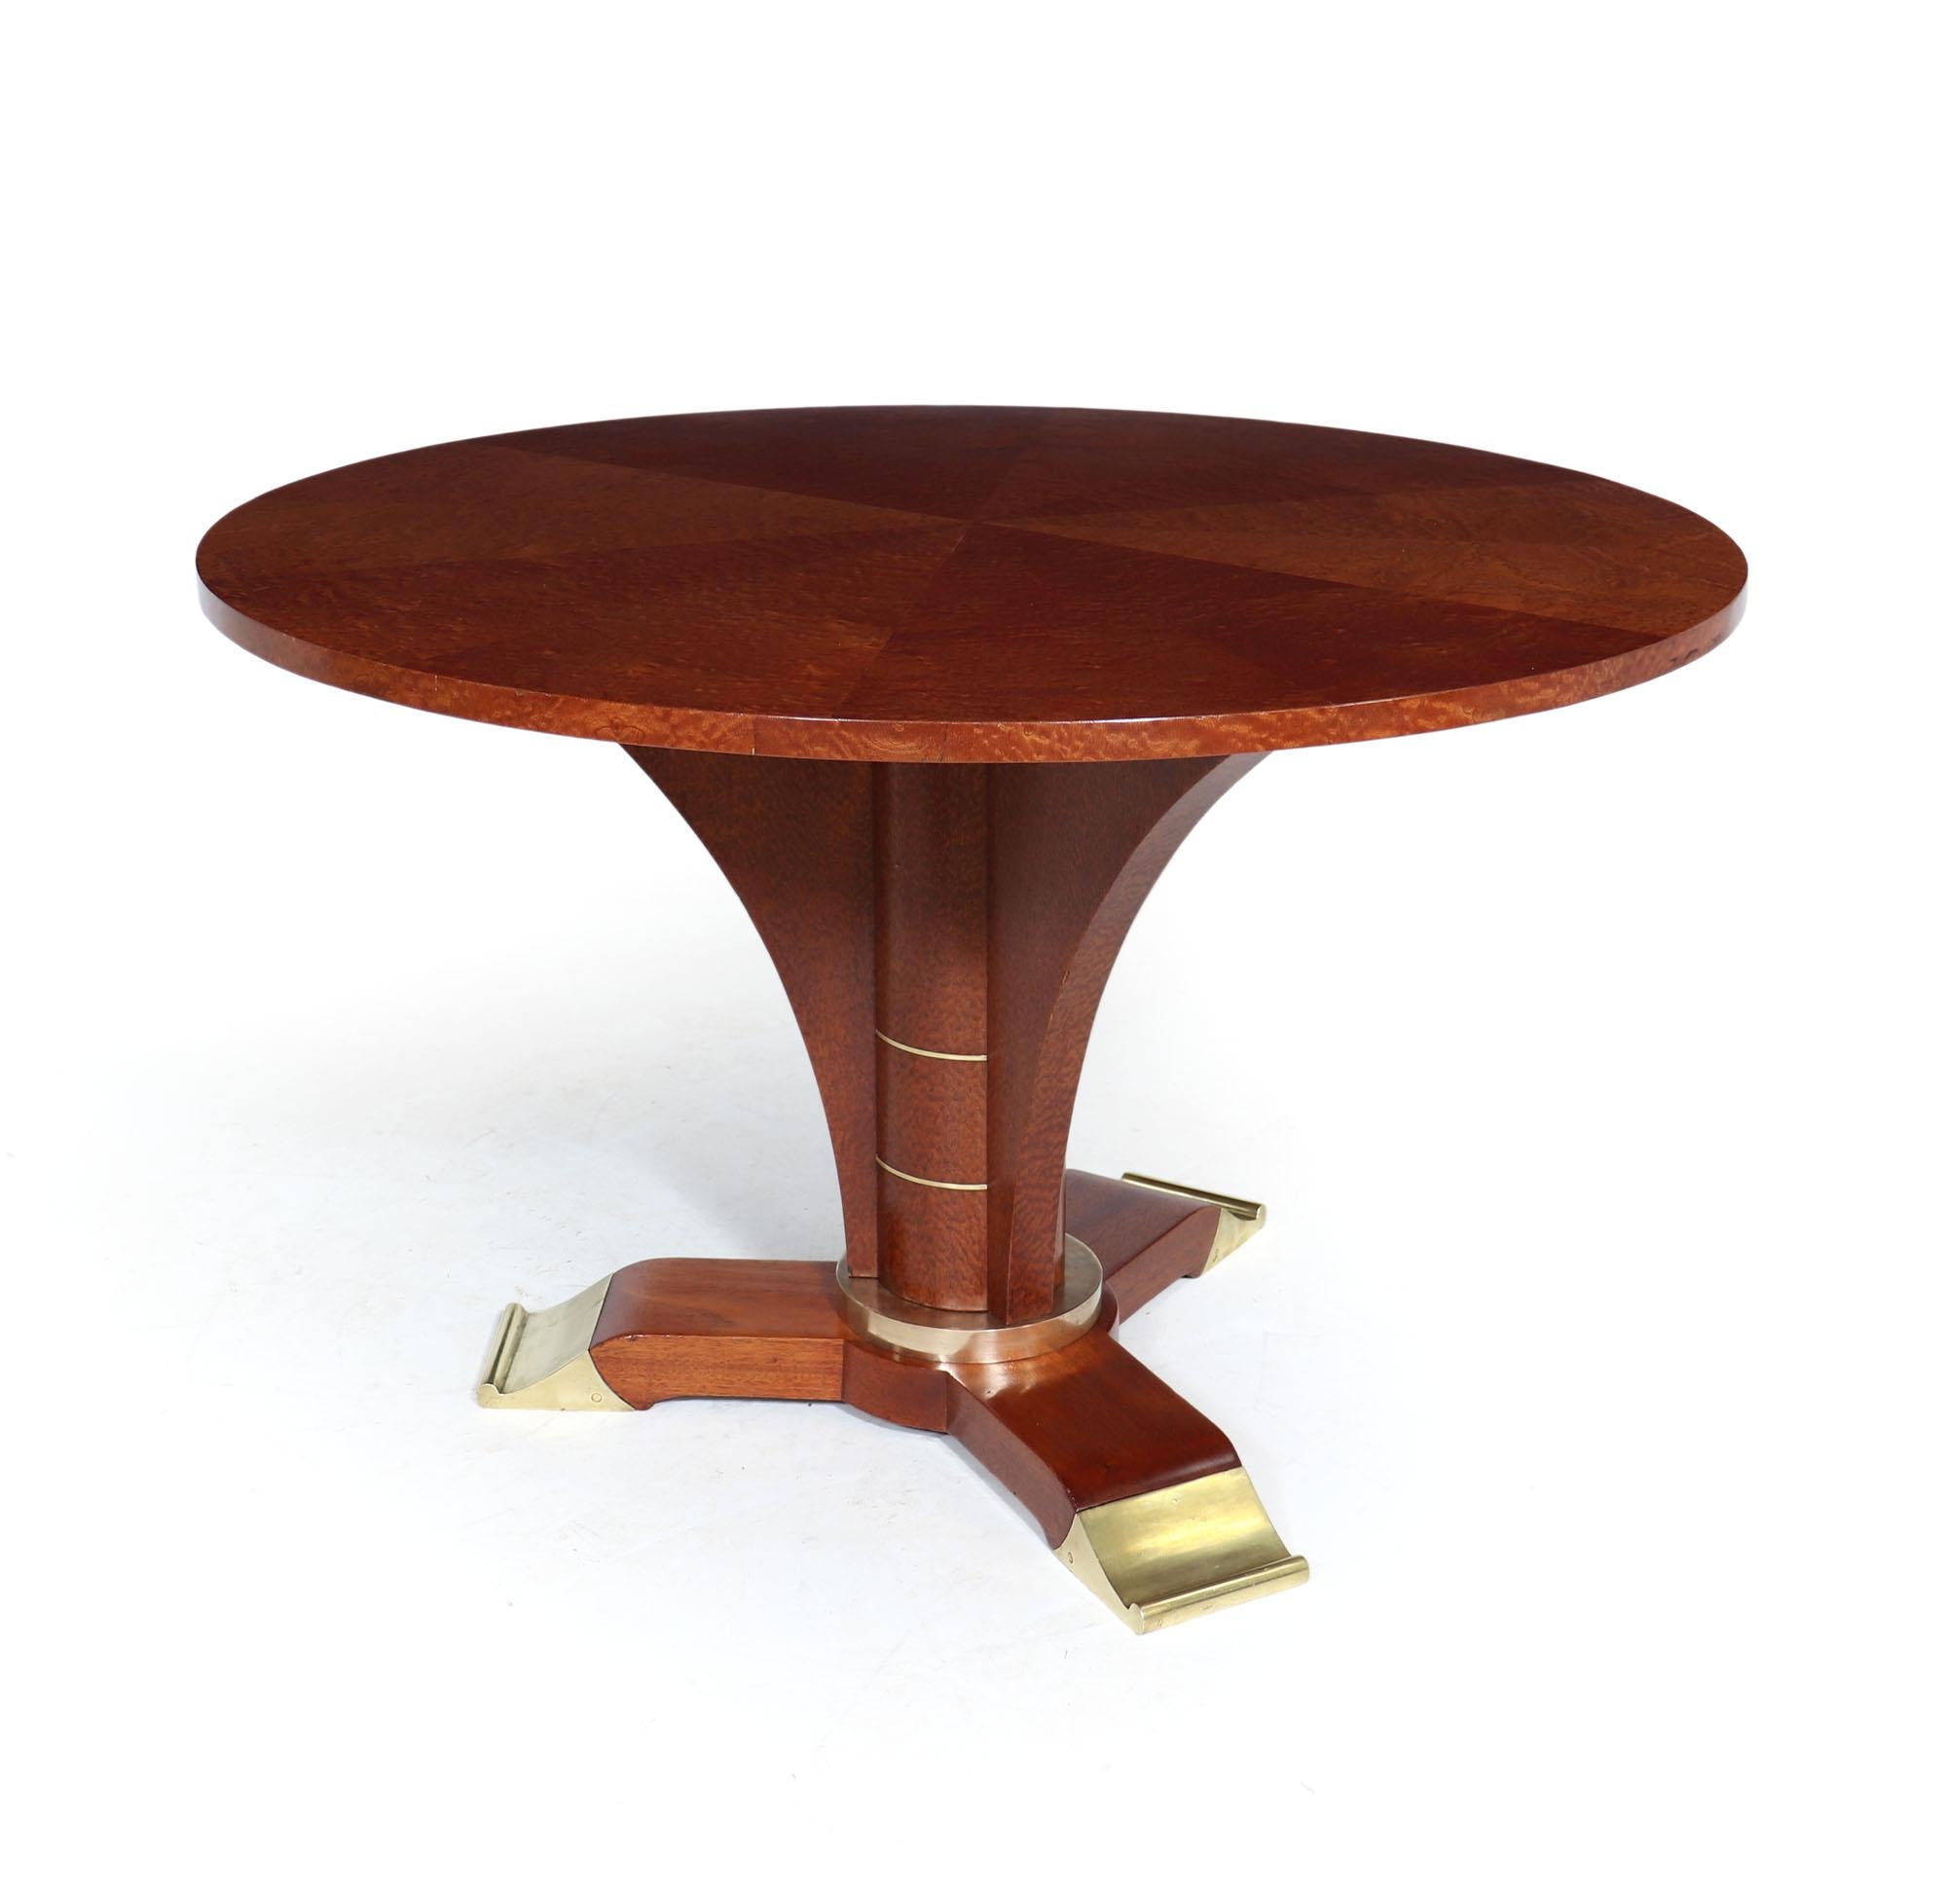 Jules Leleu - Art Deco table
An Art Deco circular coffee table by Jules Leleu, Exceptionally high quality and appealing design as to be expected from his work, it has a segmented top all in Pomelle Sapele wood, it has a turned central column with